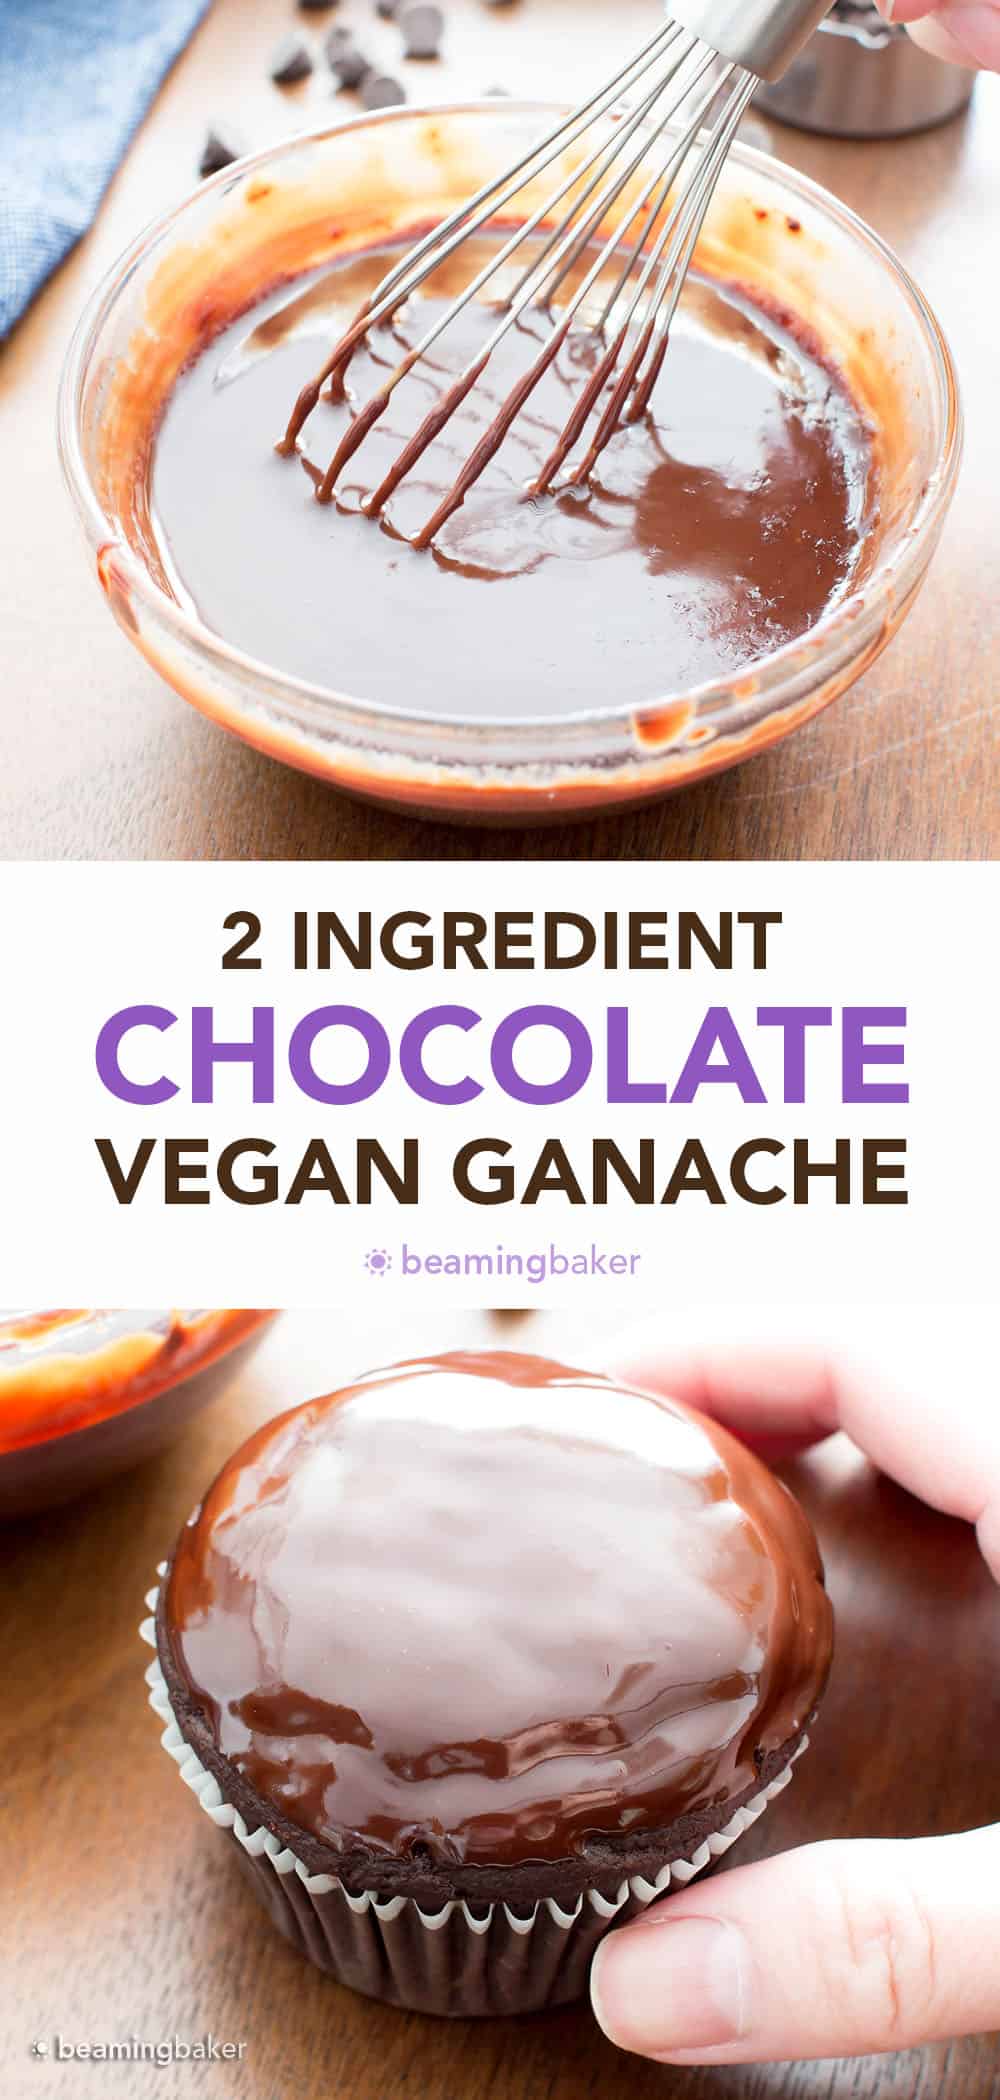 Vegan Chocolate Ganache: just 2 ingredients for the best vegan chocolate ganache—velvety, rich and chocolatey. Only 5 minutes to vegan chocolate delight. #Vegan #ChocolateGanache #Ganache #VeganChocolate | Recipe at BeamingBaker.com